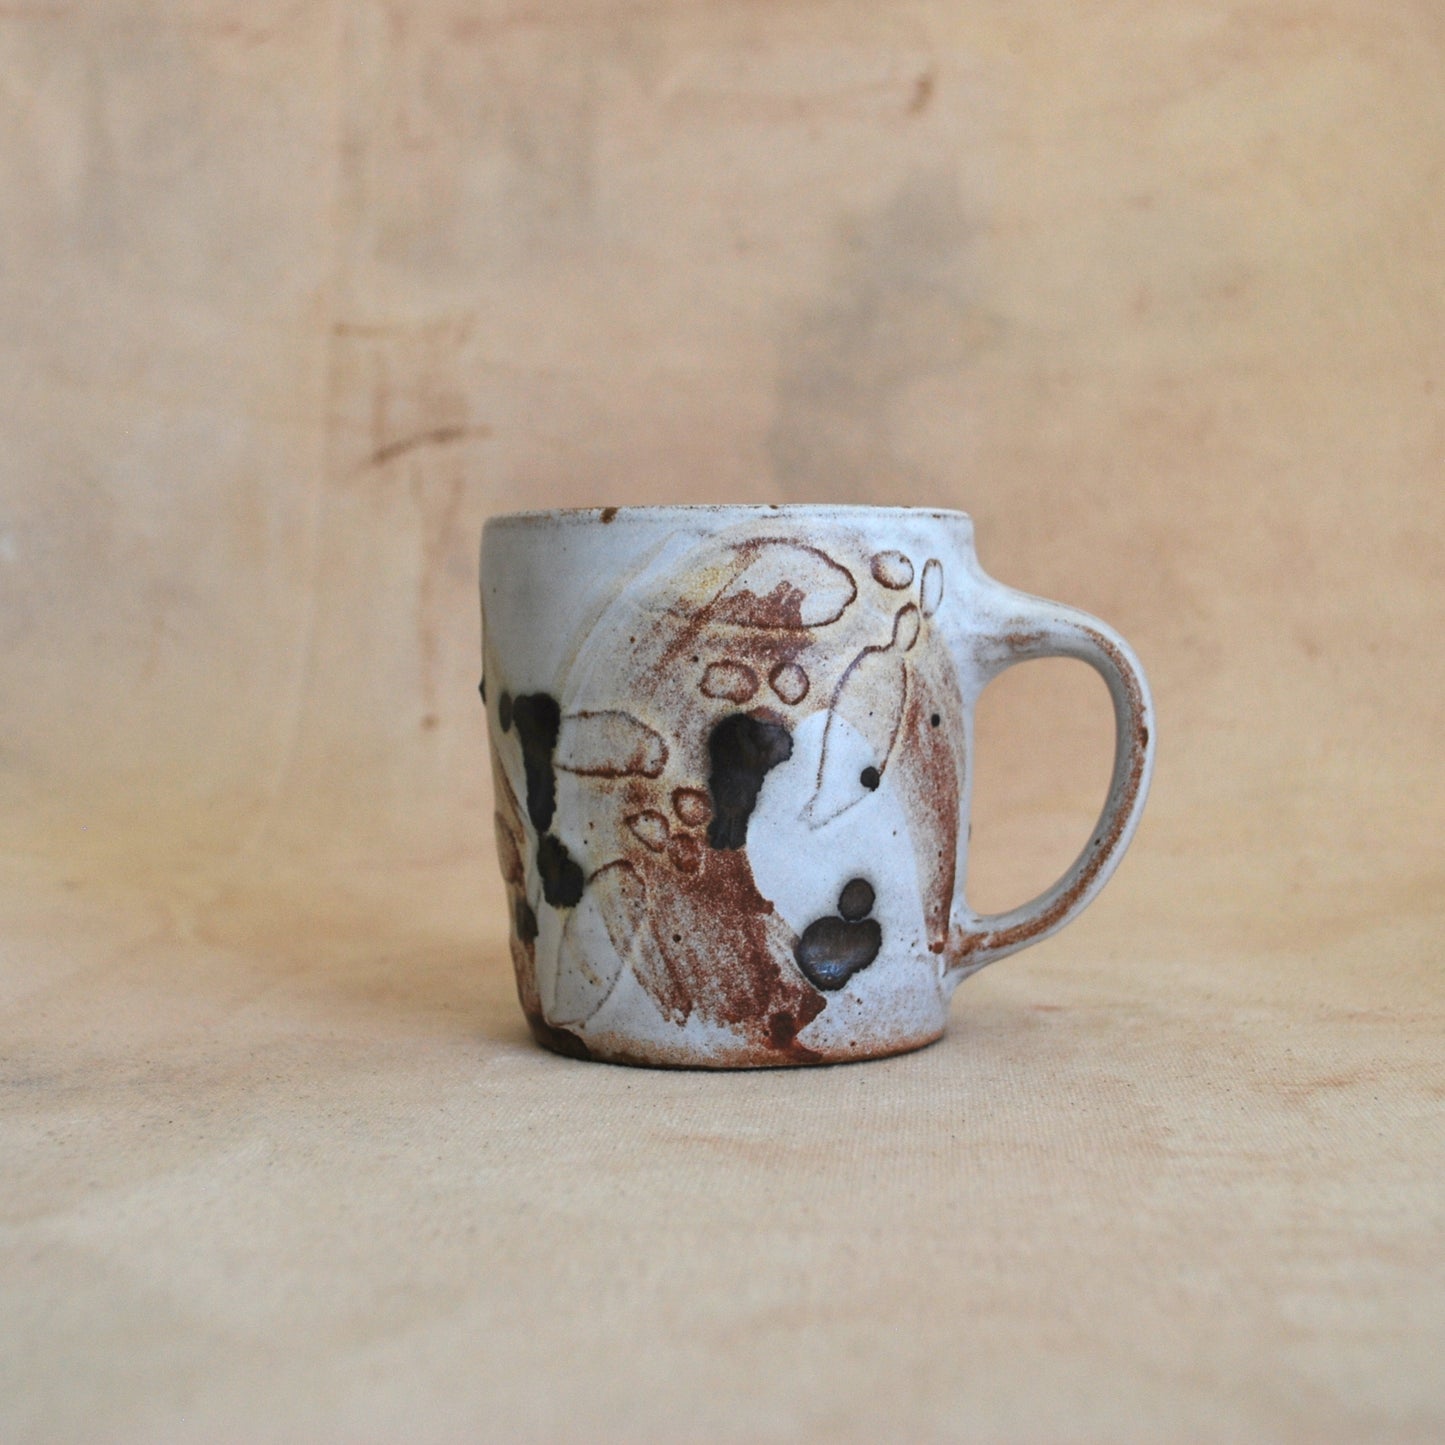 Etched Mug in Iron